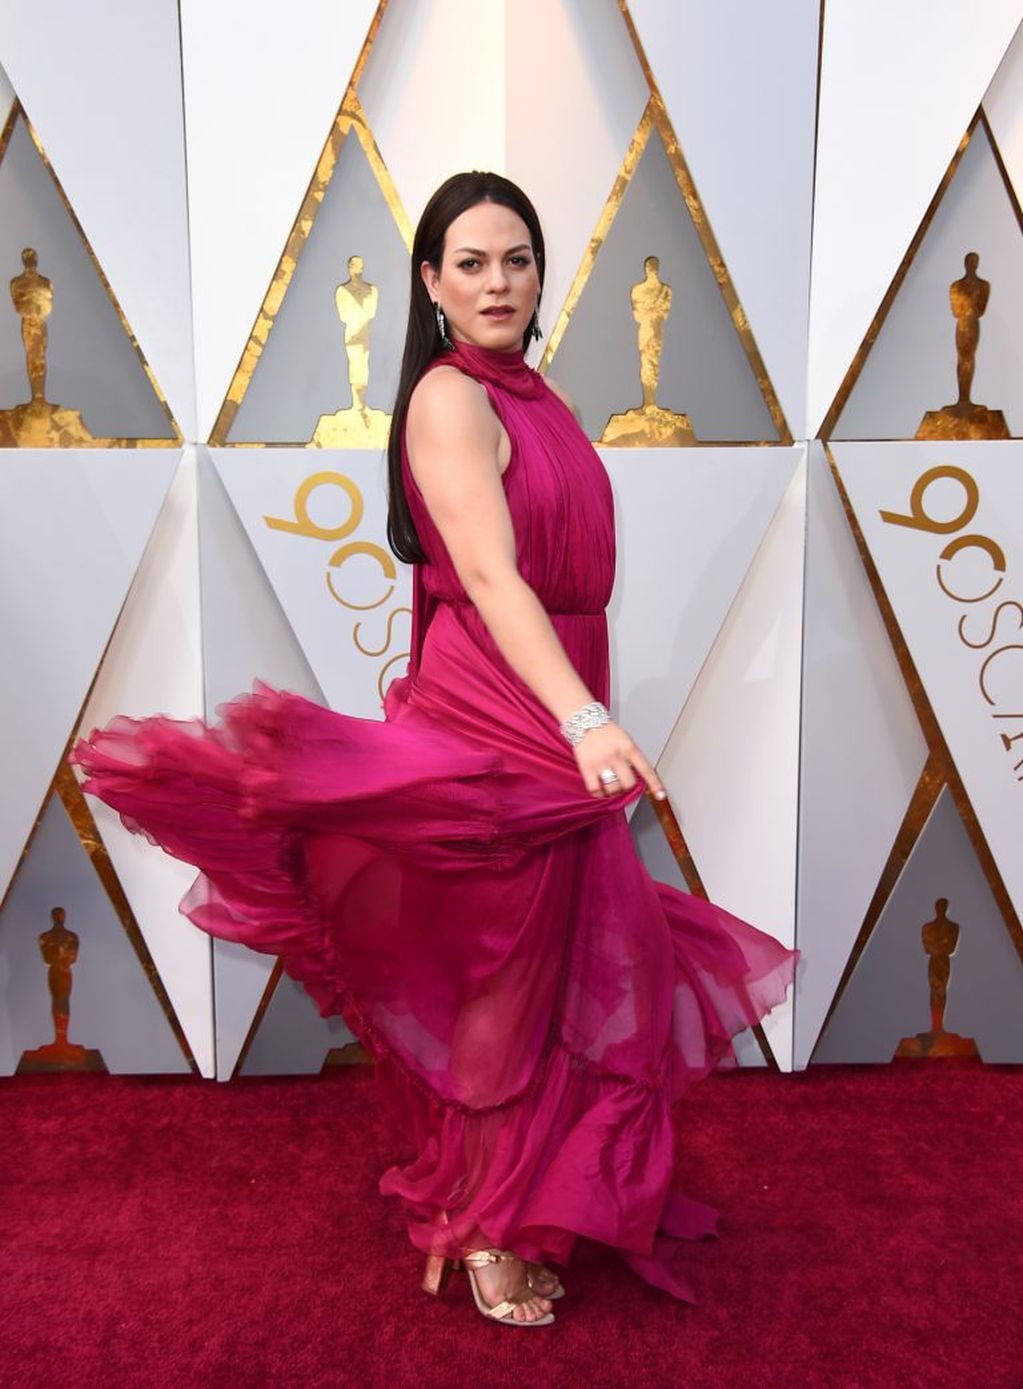 Daniela Vega arrives at the Oscars on Sunday, March 4, 2018, at the Dolby Theatre in Los Angeles. (Photo by Jordan Strauss/Invision/AP)